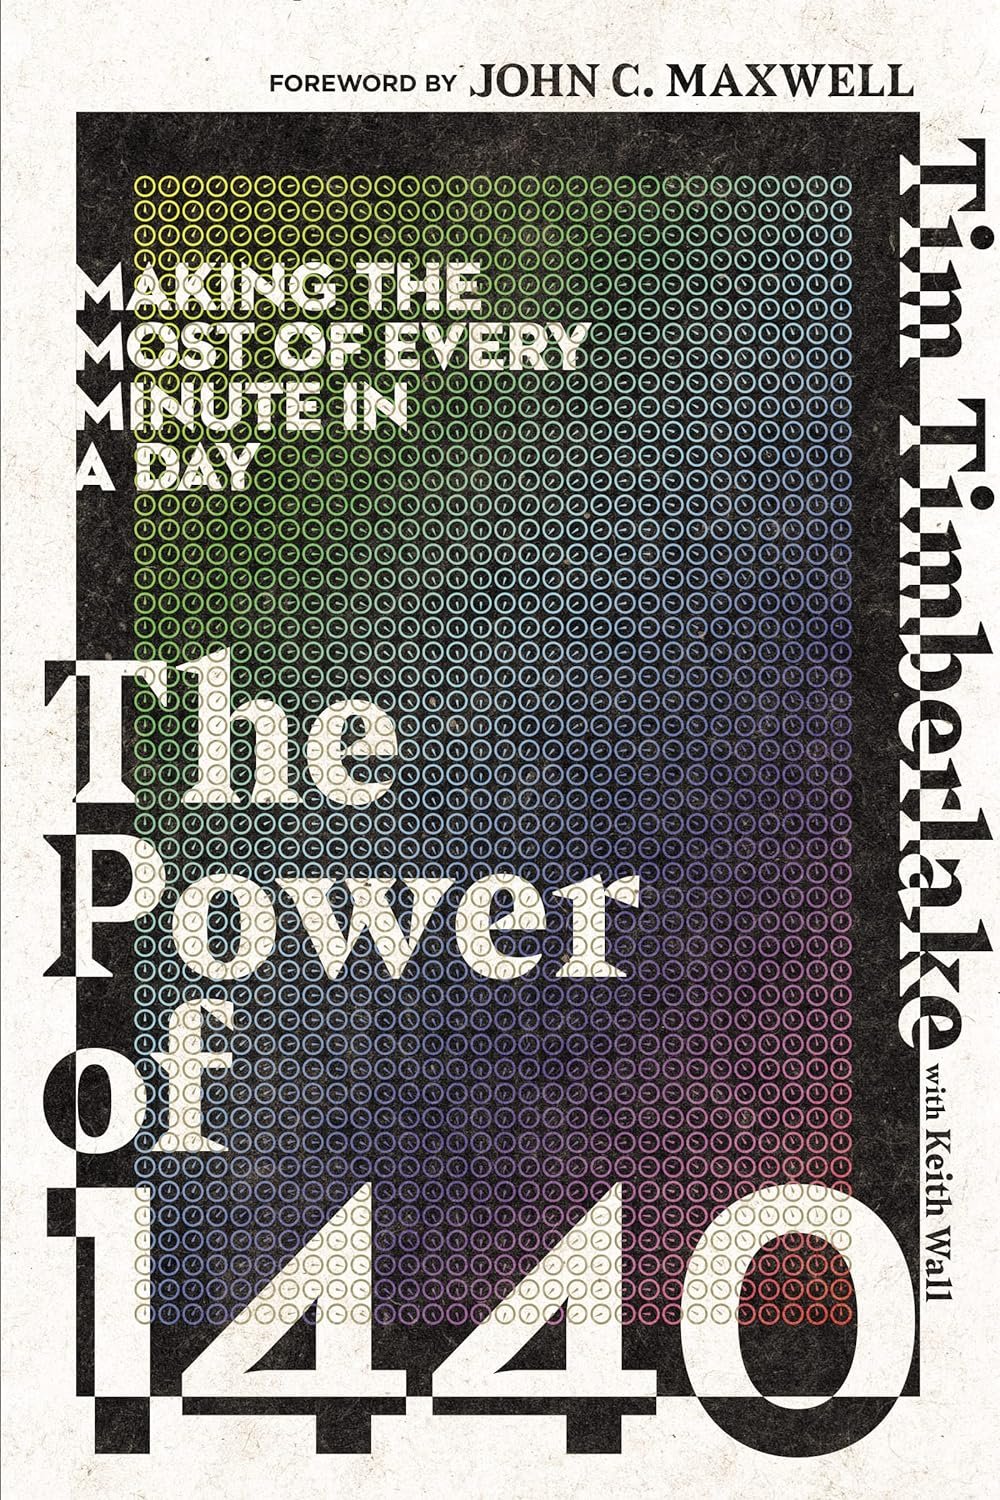 The Power of 1440: Making the Most of Every Minute in a Day